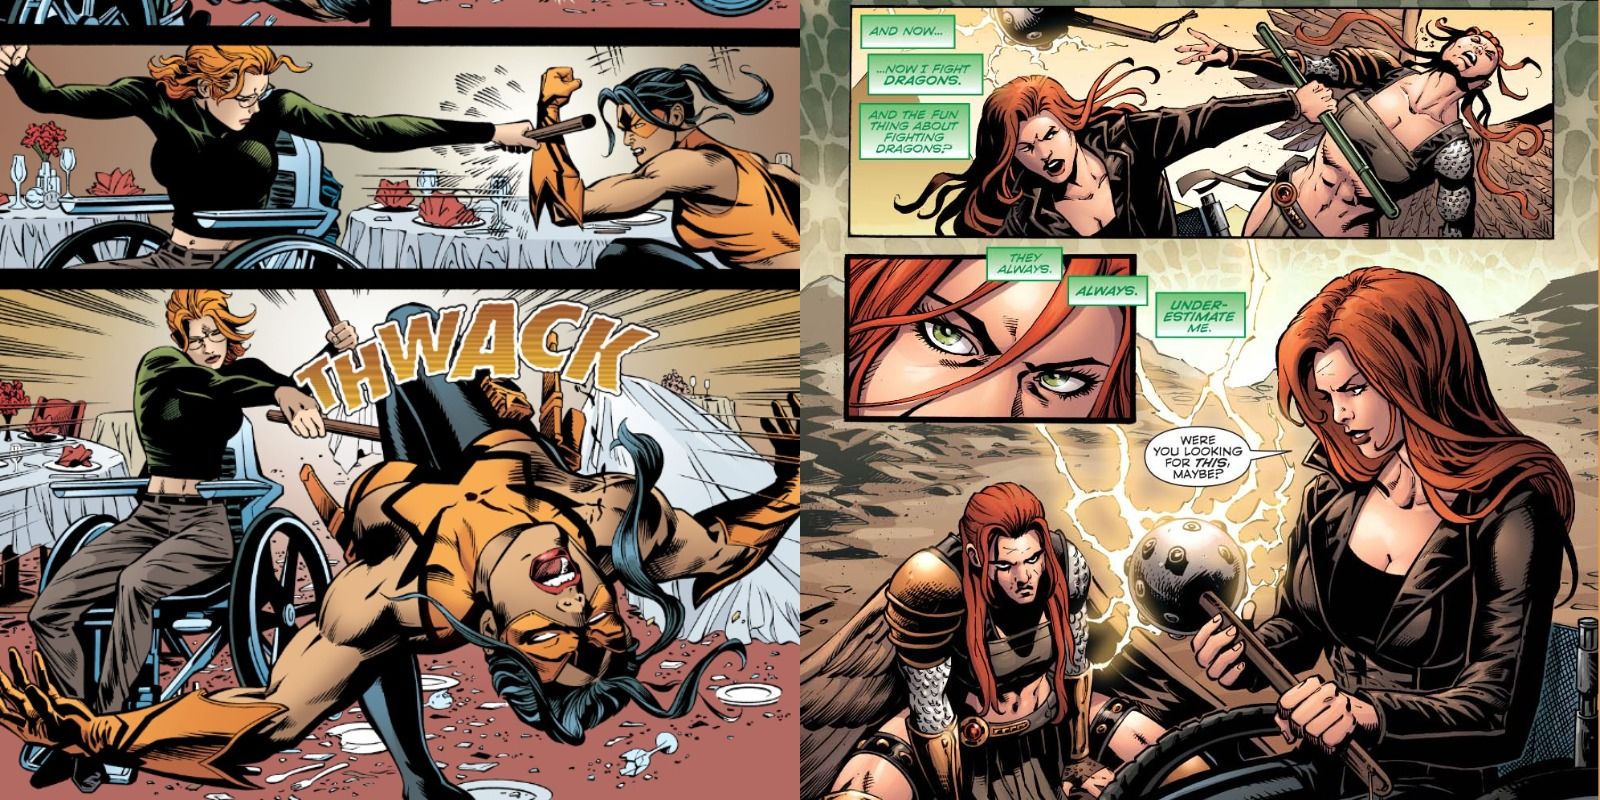 Side-by-side view of Oracle fighting Tarantula on the left and Oracle taking down Hawkgirl on the right in DC comics